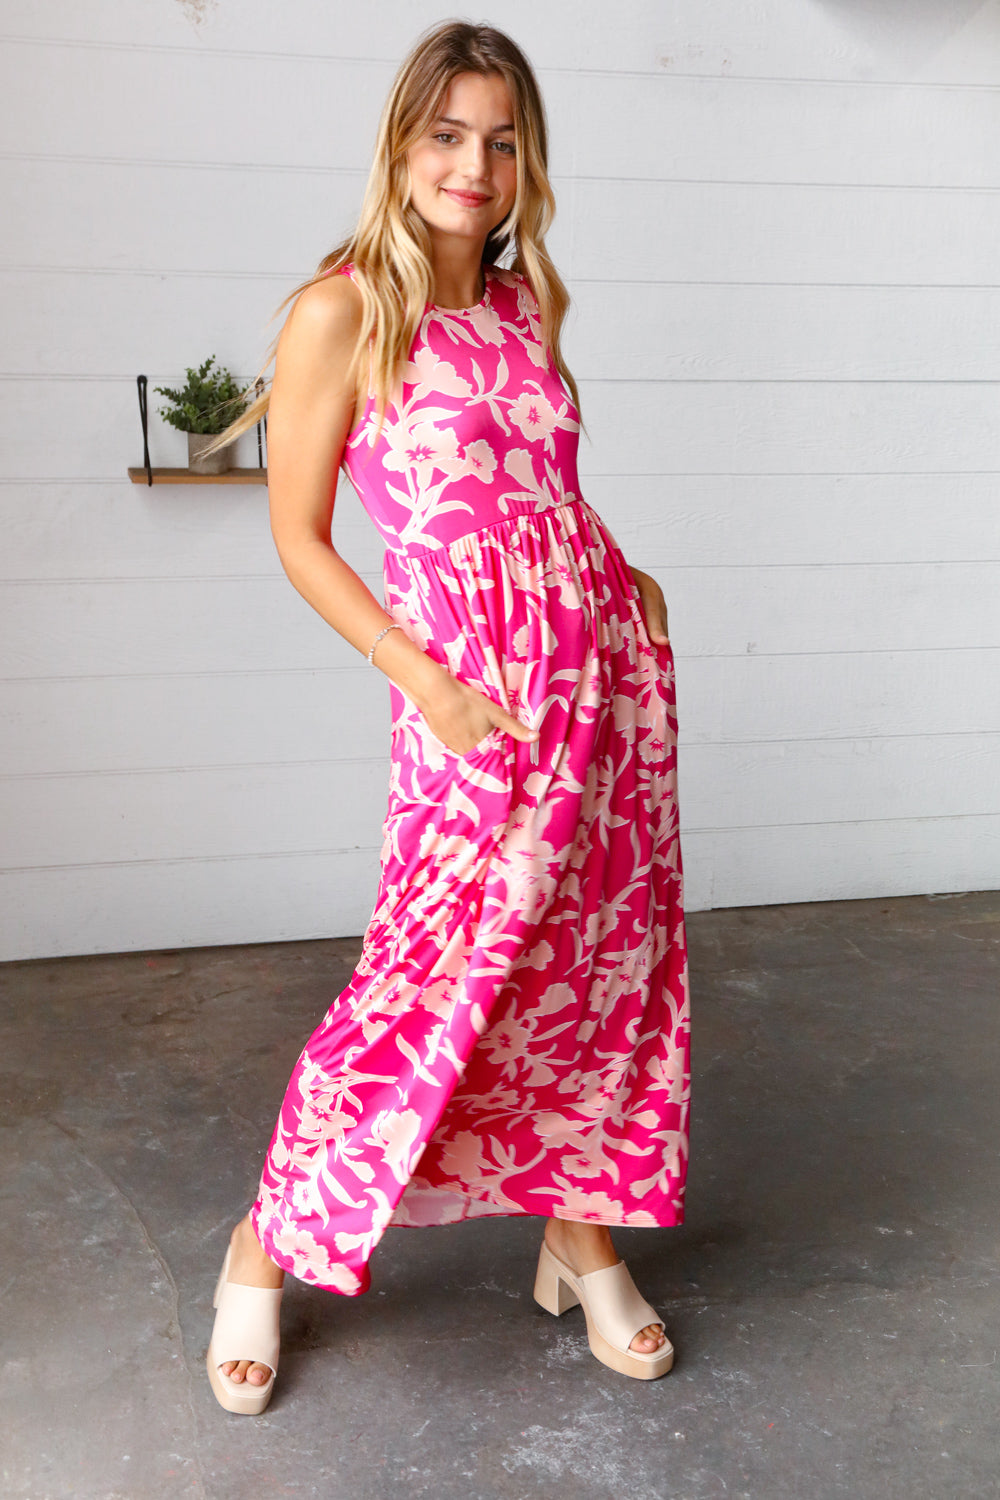 Pink Floral Print Fit and Flare Sleeveless Maxi Dress